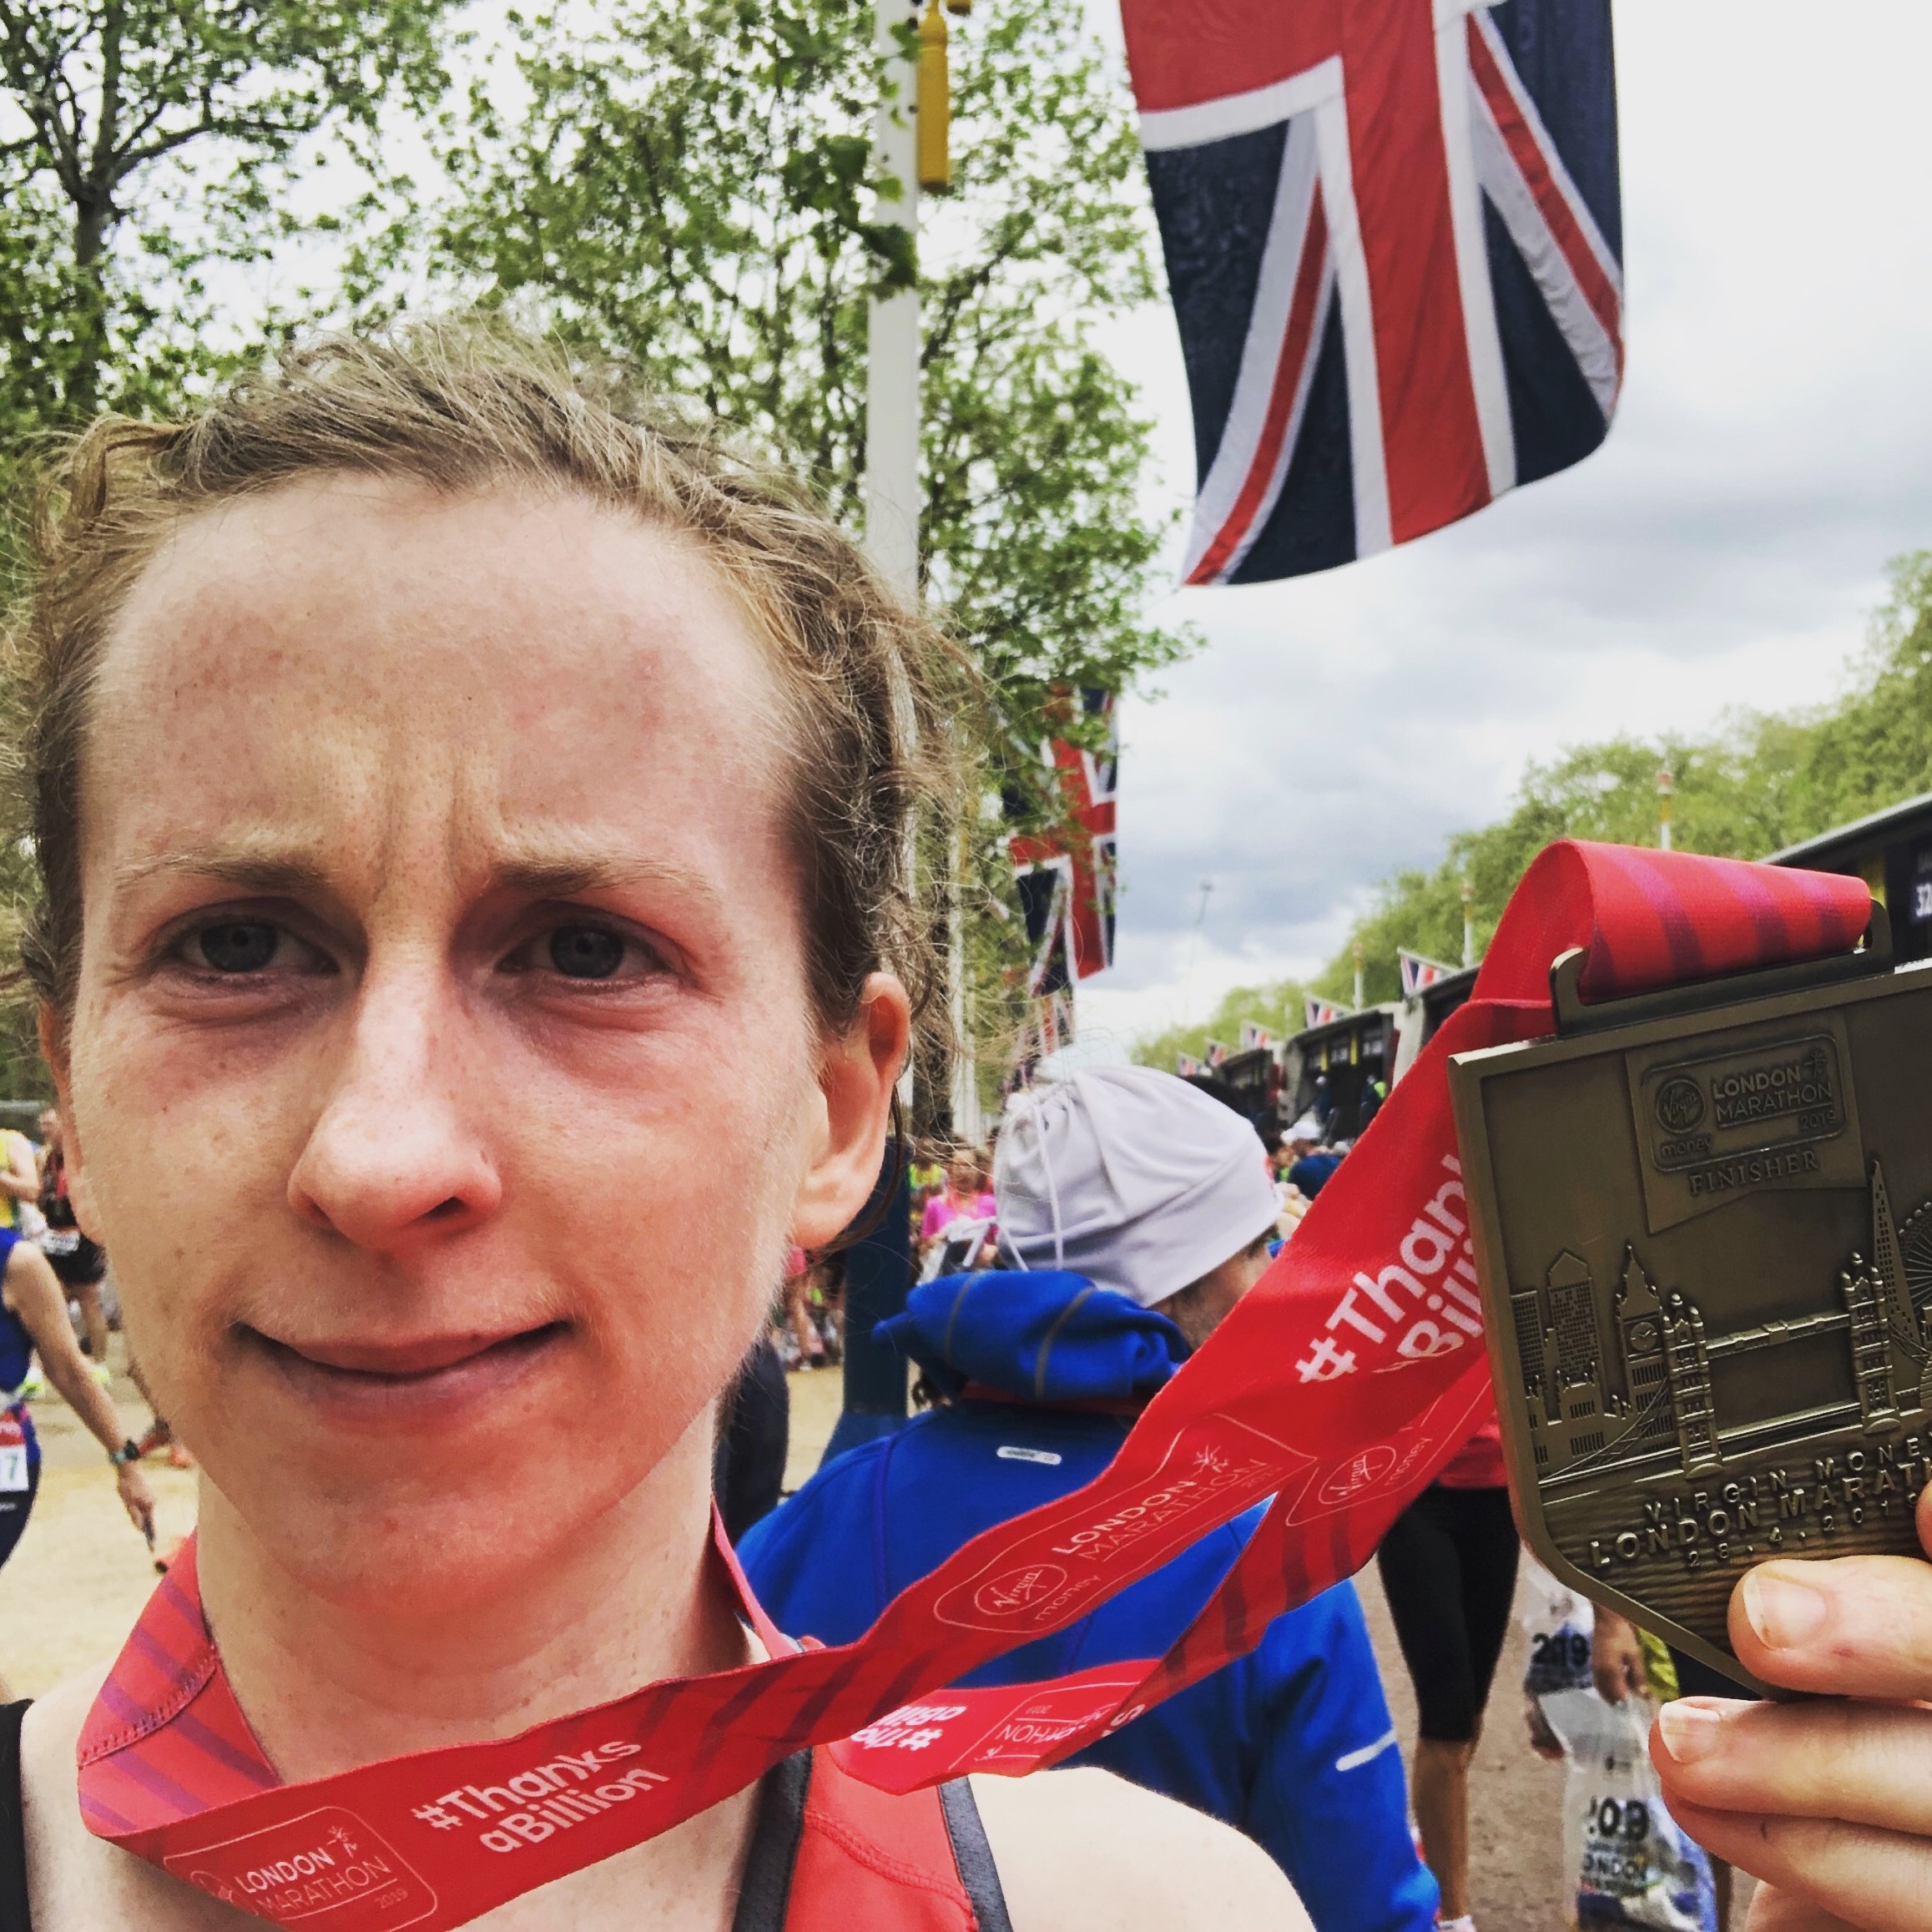 A medal and a special sense of accomplishment were among Fran’s rewards for completing the London Marathon, a 26.2-mile trek, in 2019.